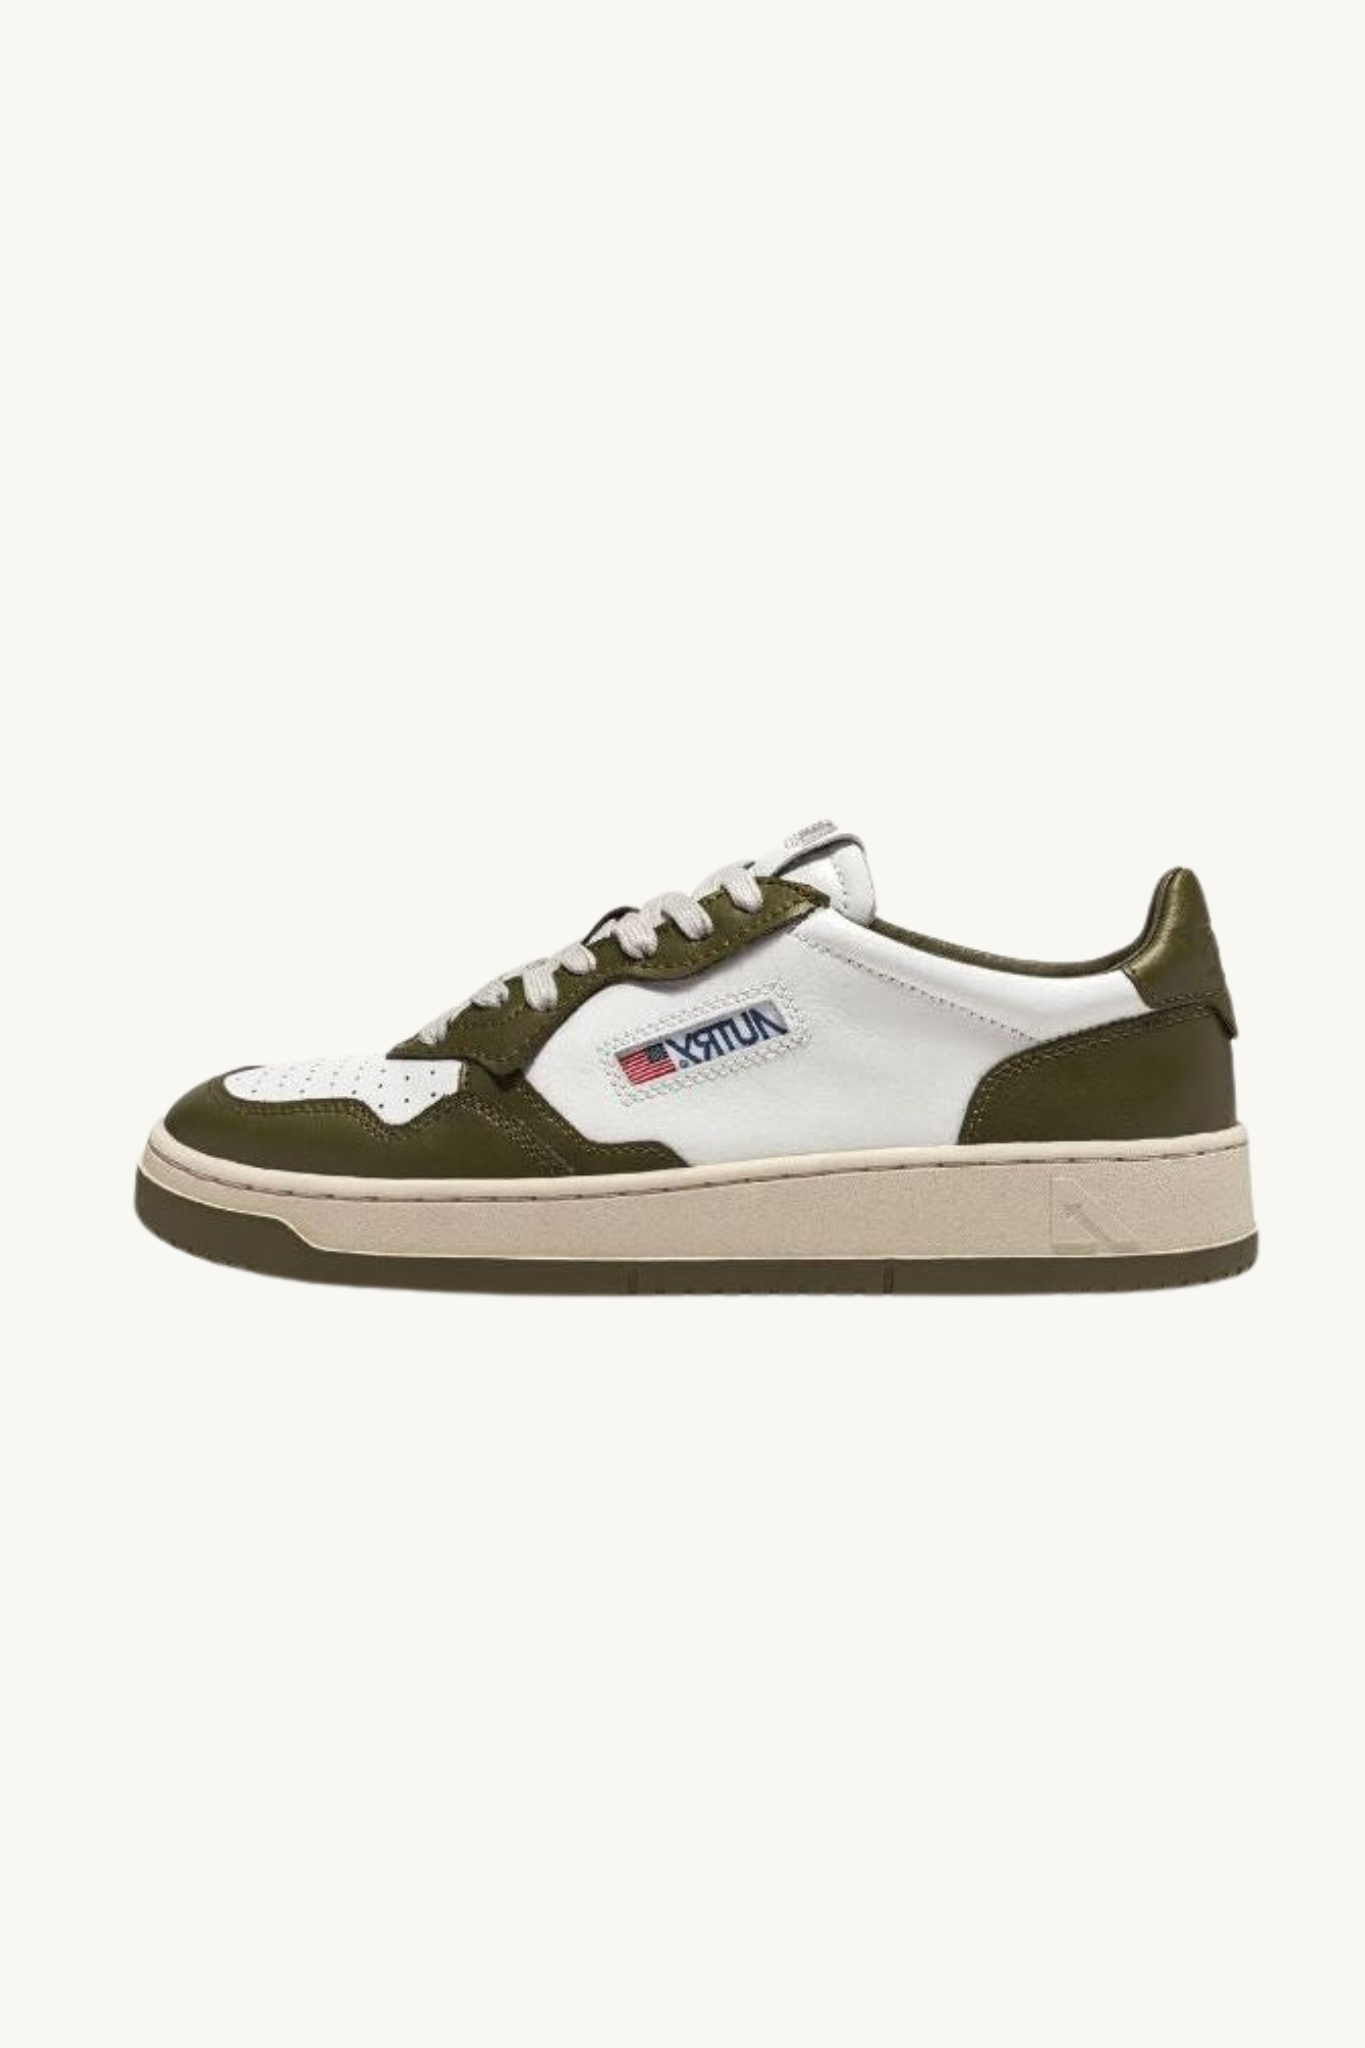 AULM-WB33 - MEDALIST LOW SNEAKERS IN TWO-TONE LEATHER COLOR WHITE AND OLIVA